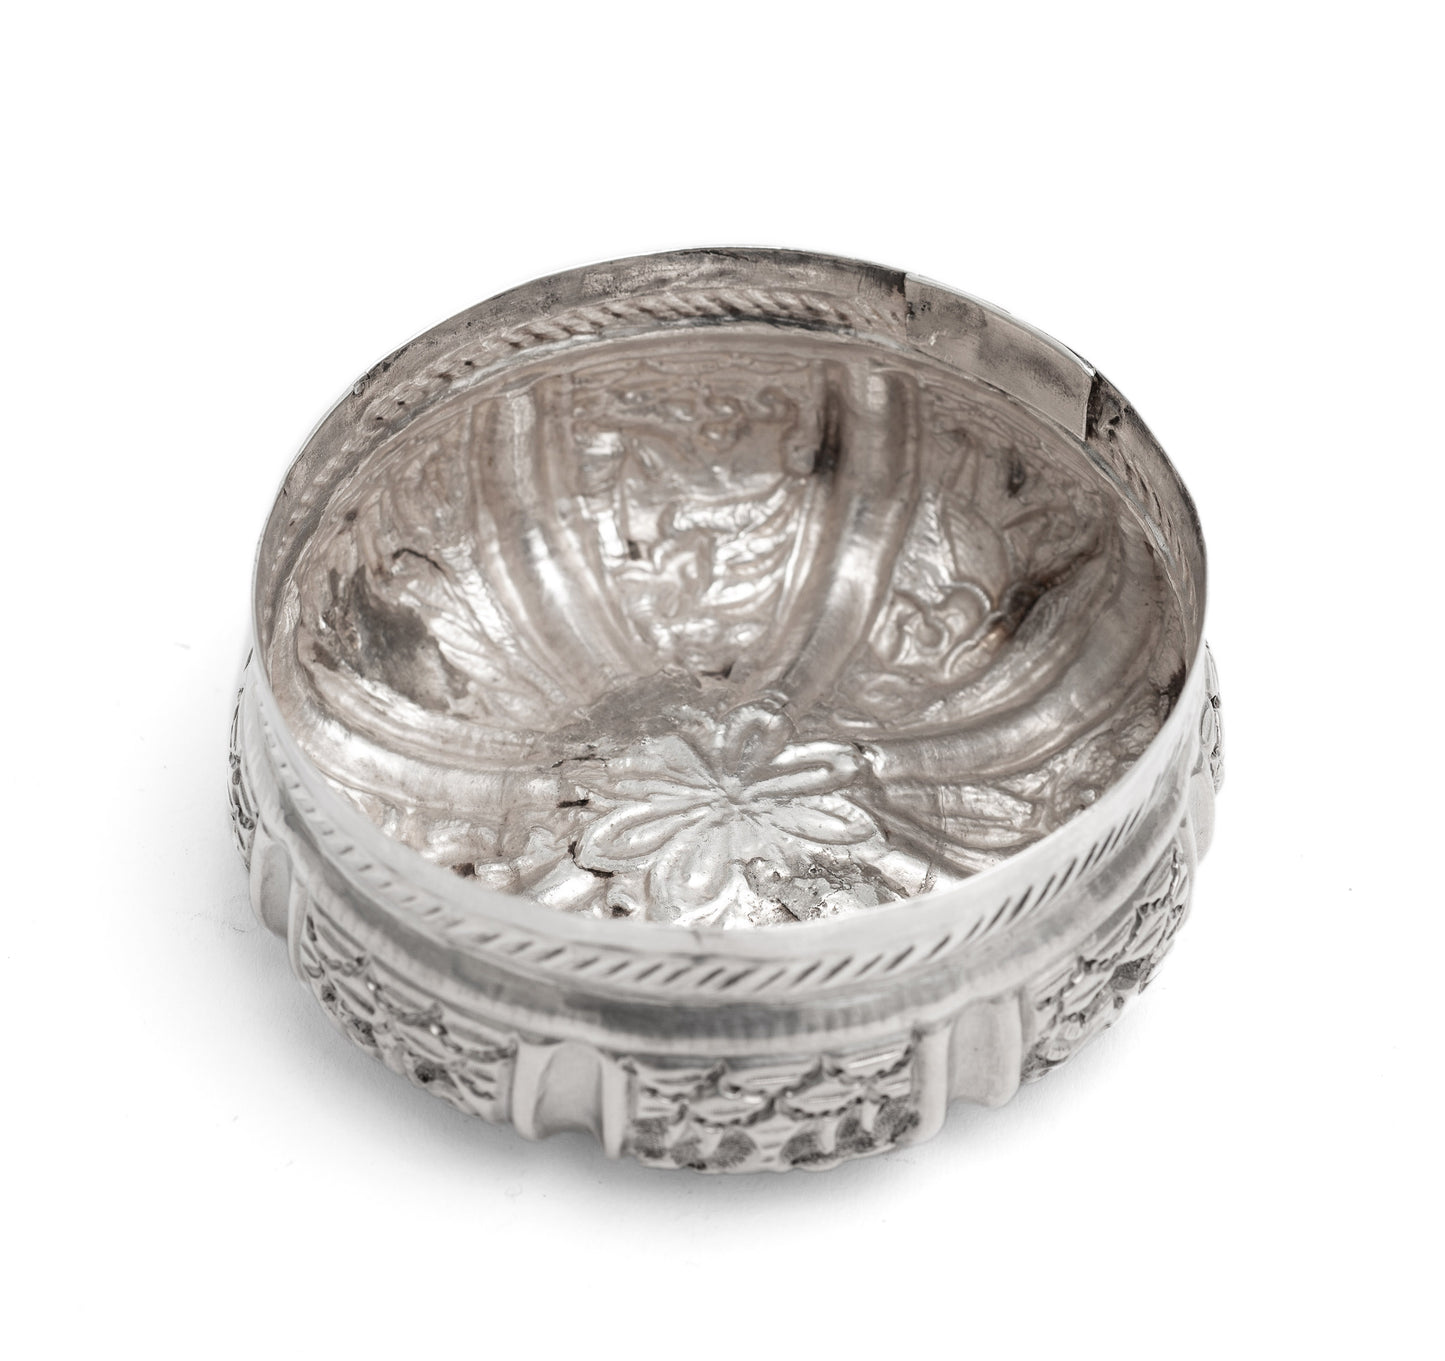 Antique Indian/Ceylonese Silver Repousse Lidded Box with Village Scene c1880 (Code 2258)